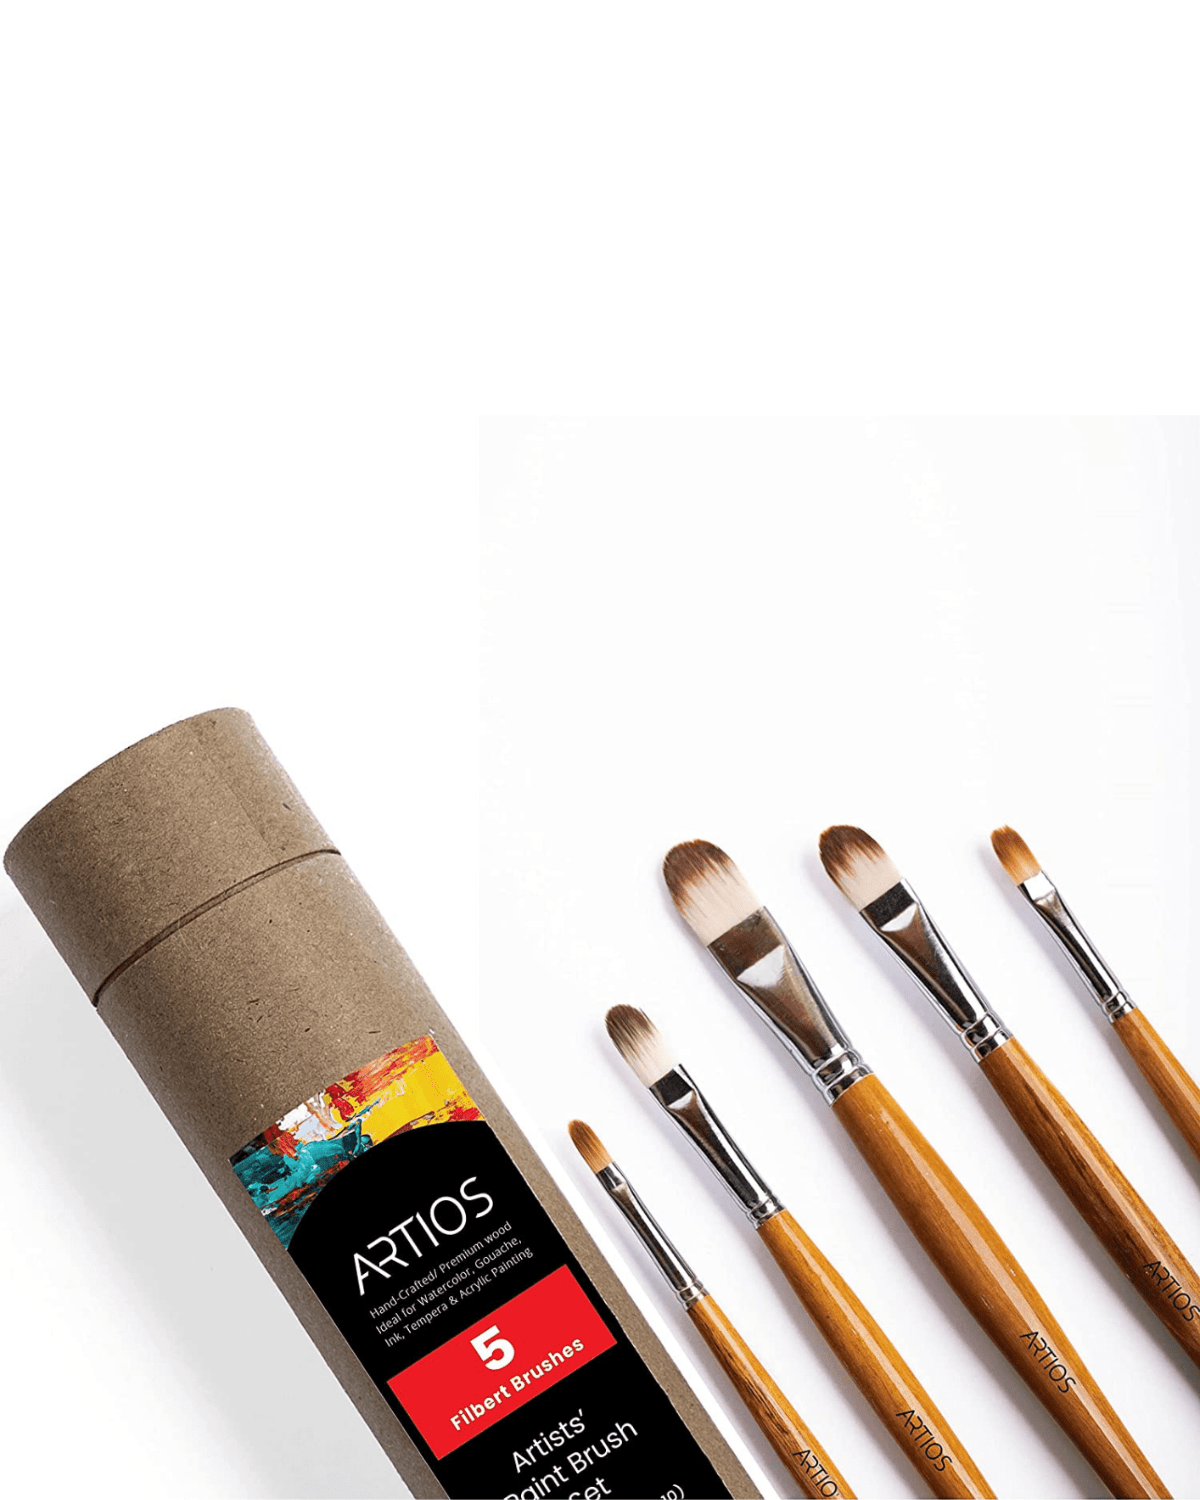 ARTIOS Mop Brush for Painting /Watercolor Brush Set for Artists with Brush  Holder-with Paint Brush Set of 4 (0, 2, 4, 8)-Wood